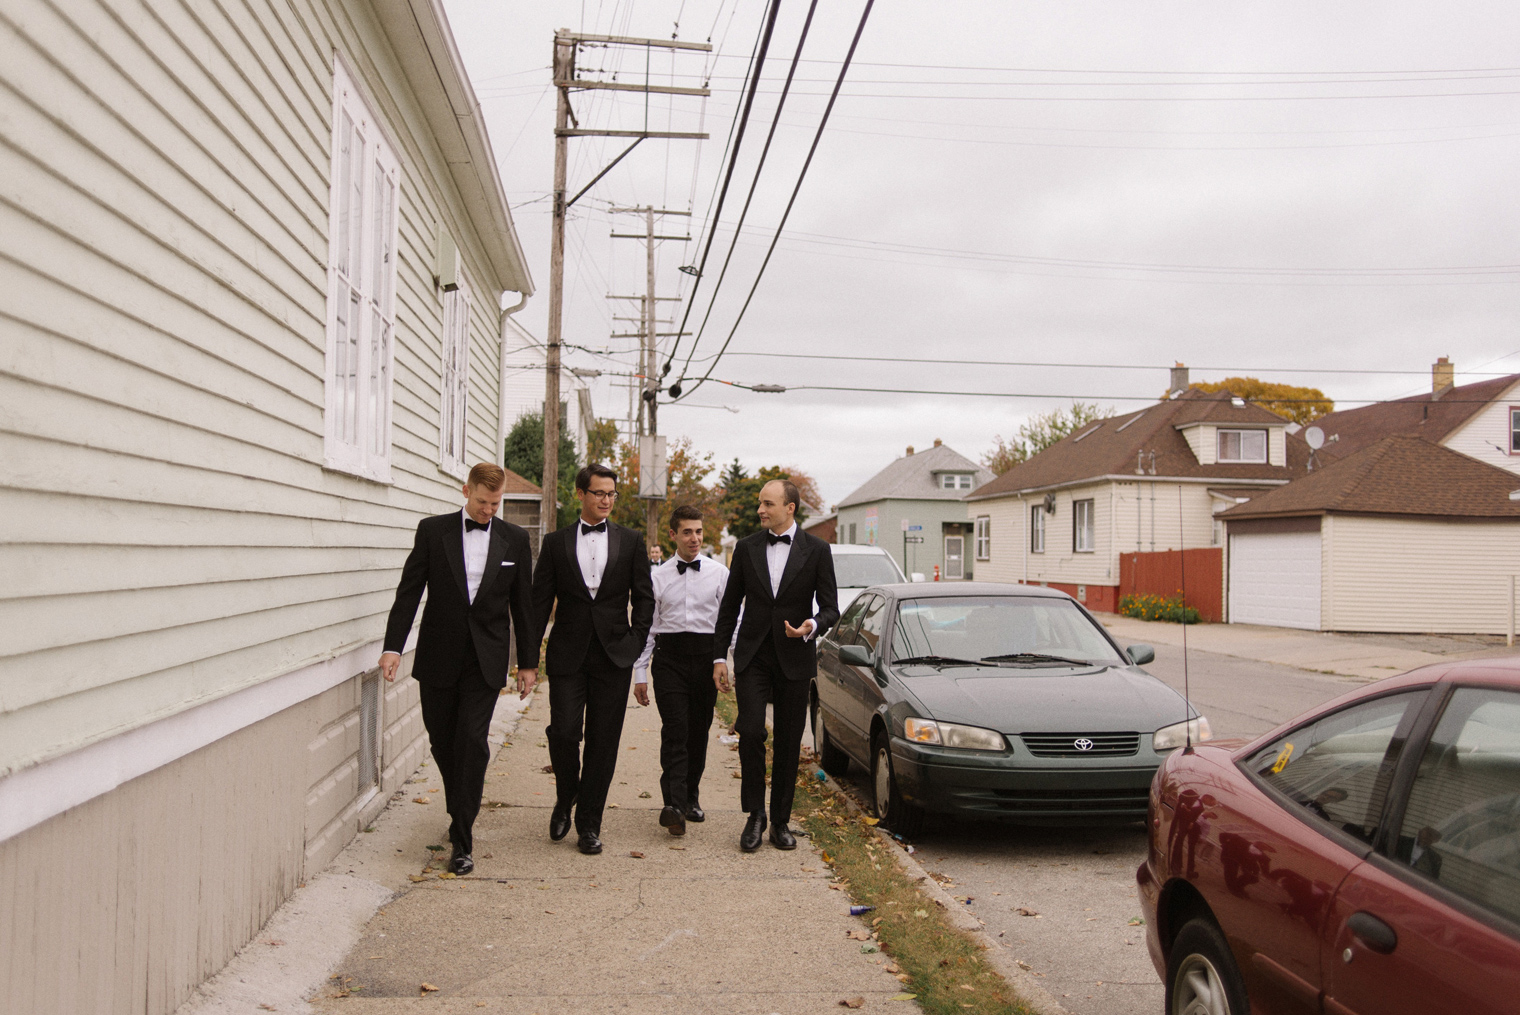 The groom and his groomsmen head to the wedding ceremony on a Detroit wedding day by photographer Heather Jowett.